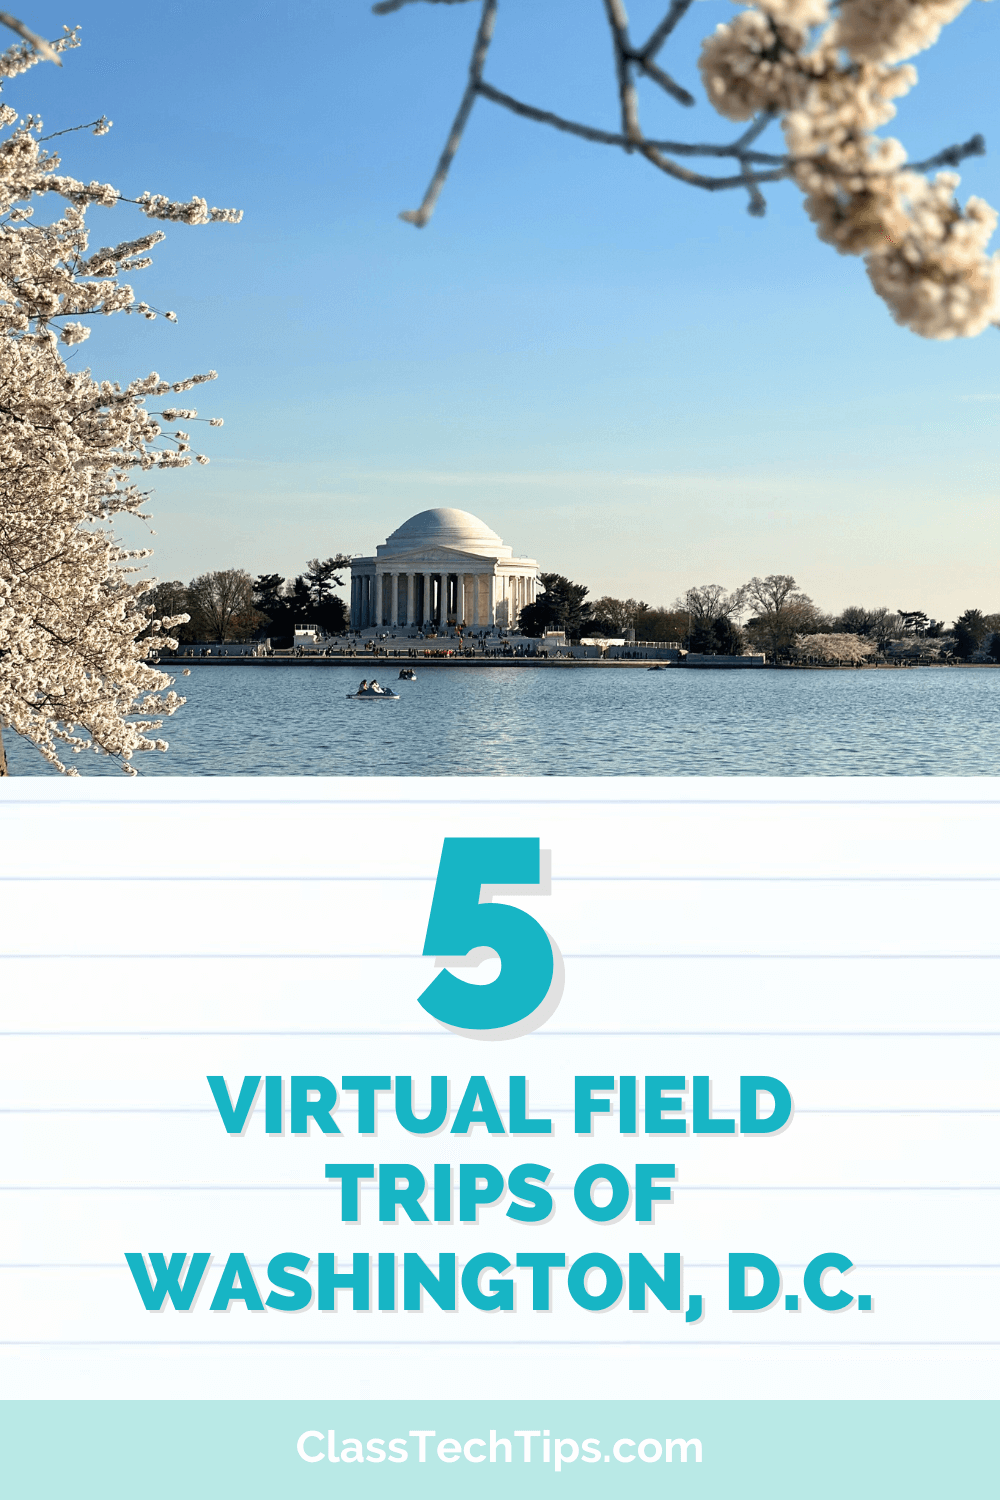 A scenic view of the Jefferson Memorial in Washington, D.C., framed by blooming cherry blossoms, with text overlay reading "5 Virtual Field Trips of Washington, D.C." from ClassTechTips.com.